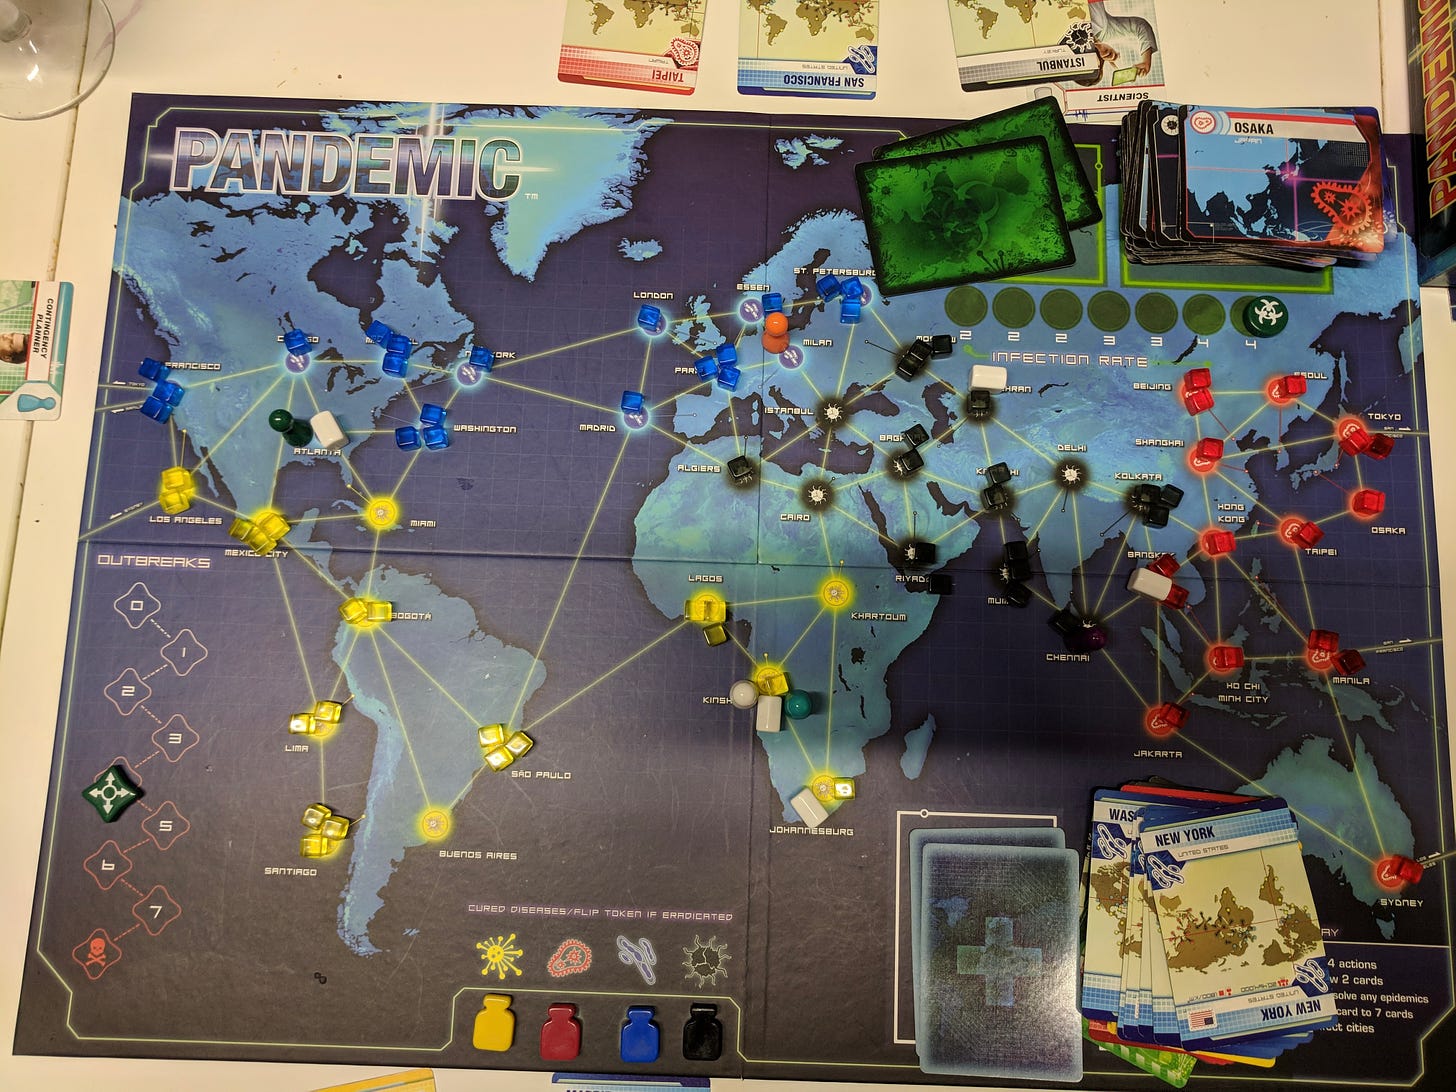 The board of the 'Pandemic' game. It is a map of the world with different cities noted with circles, and lines joining them. Coloured cubes representing diseases are placed all over the map.